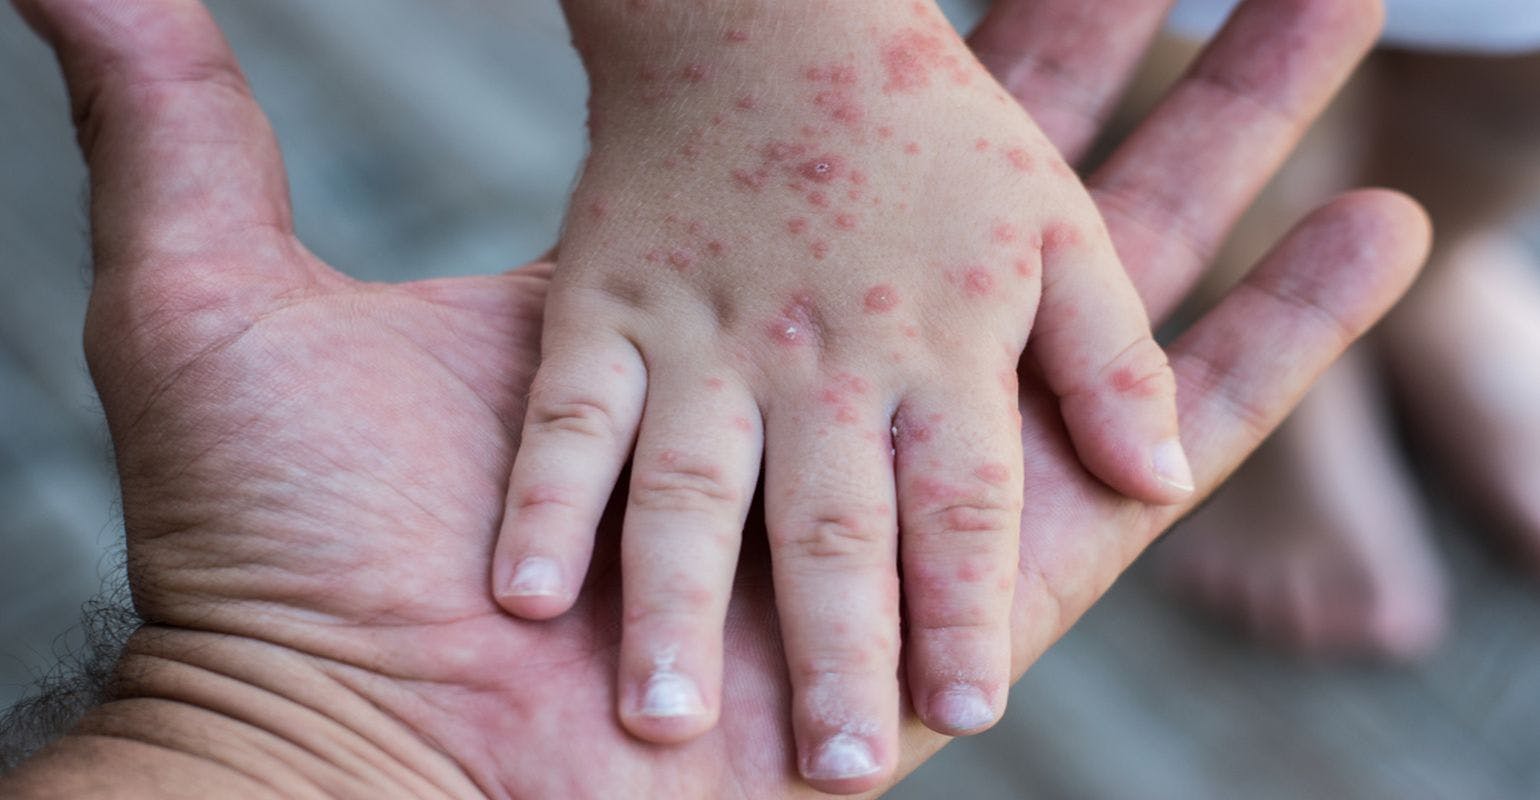 U.S. Measles Cases are the Highest Since the Disease was Eliminated in 2000